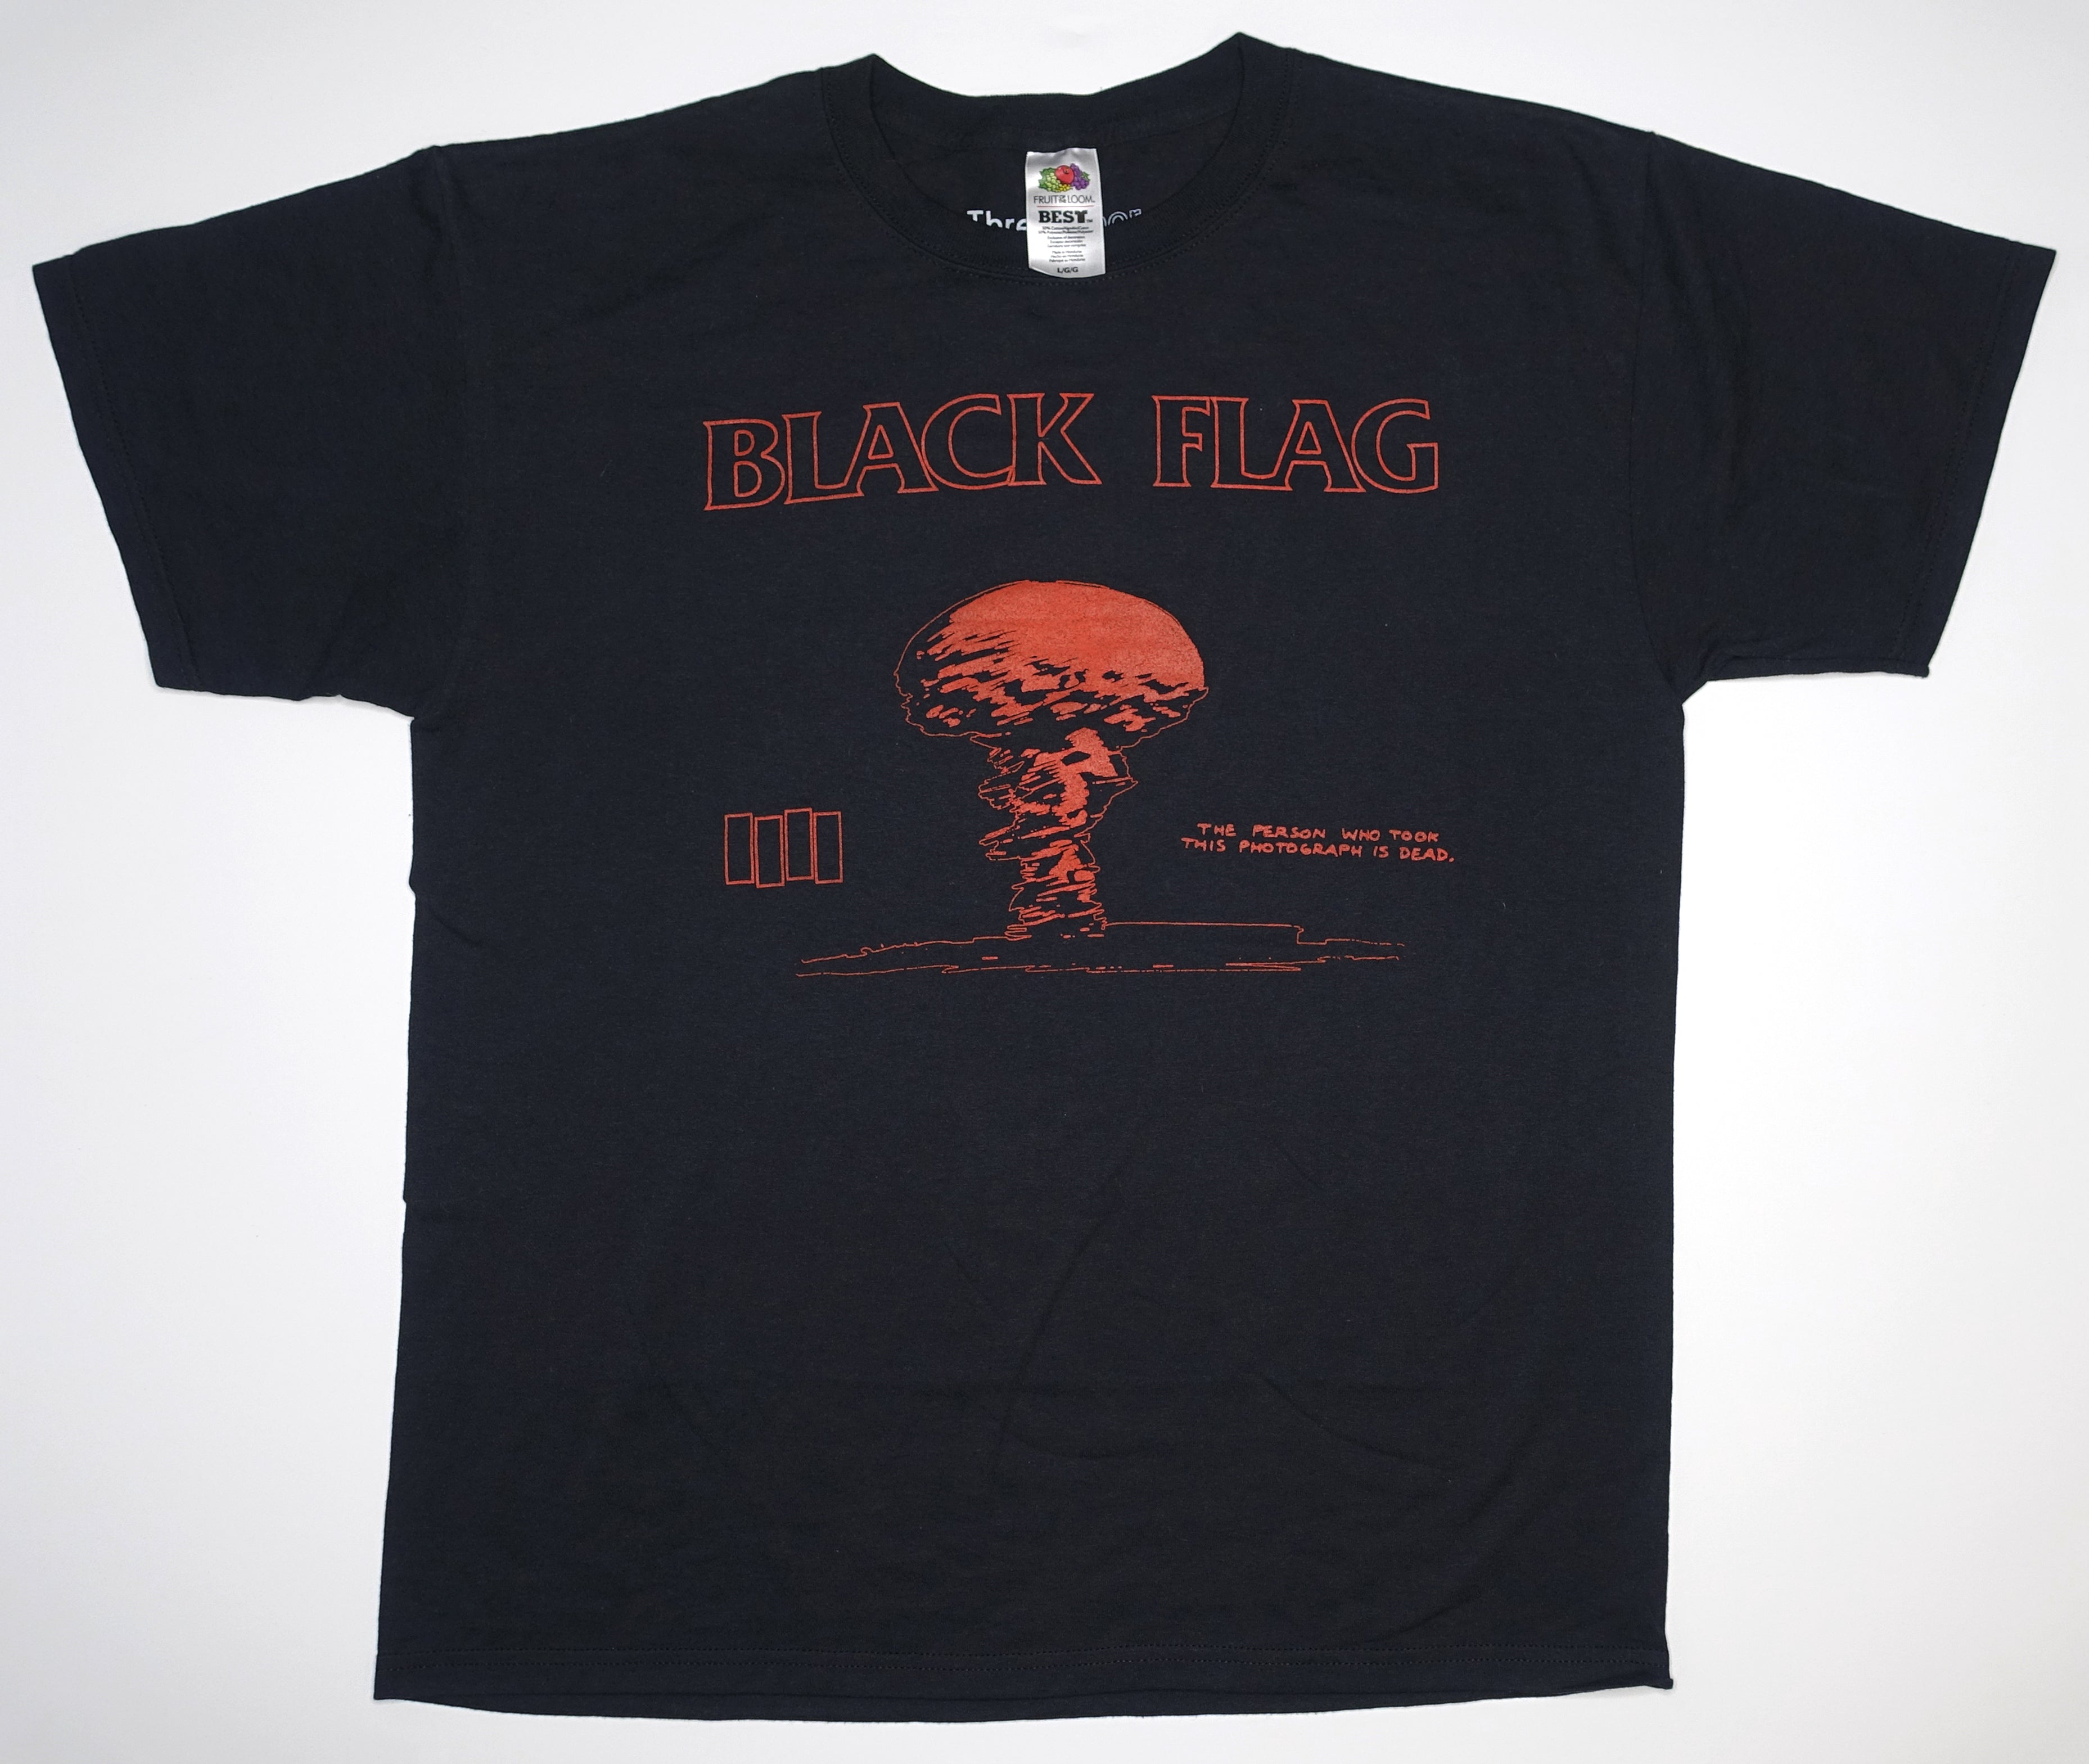 Black Flag - The Person Who Took This Photo Is Dead / In My Head 1986 Tour Shirt (Bootleg By Me) Size Large